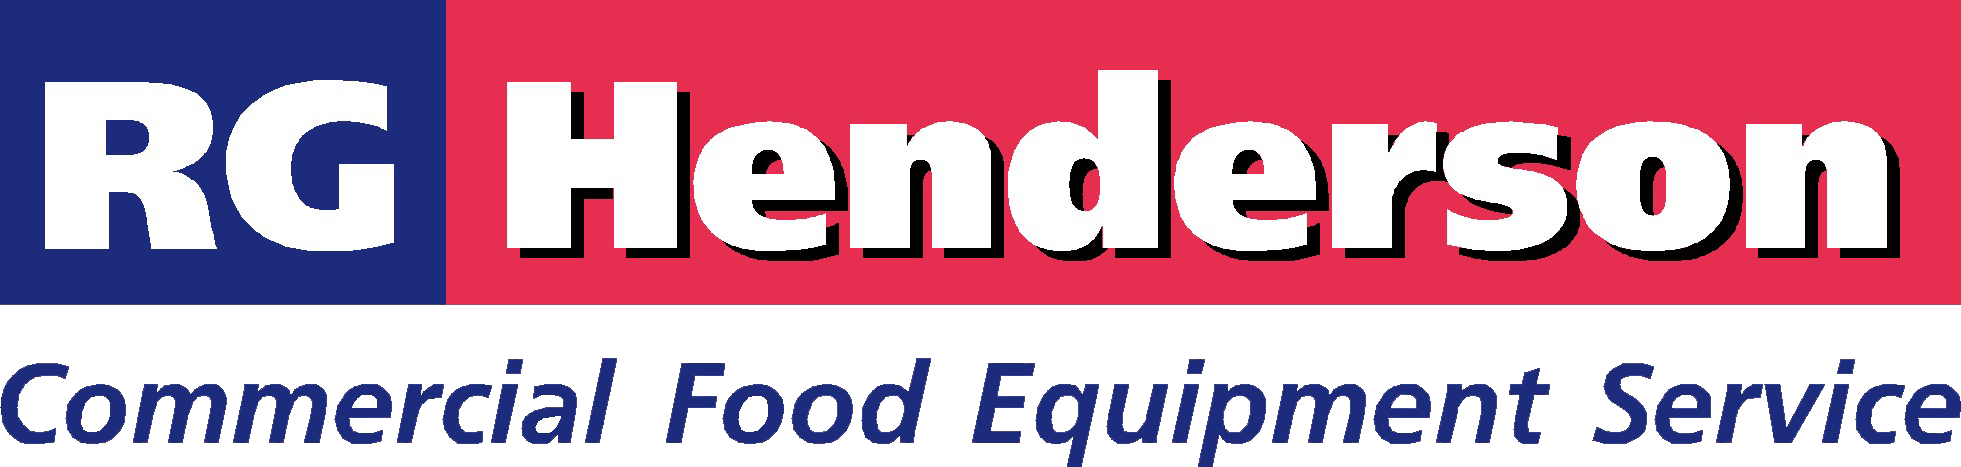 RG Henderson - Commercial Food Equipment Service